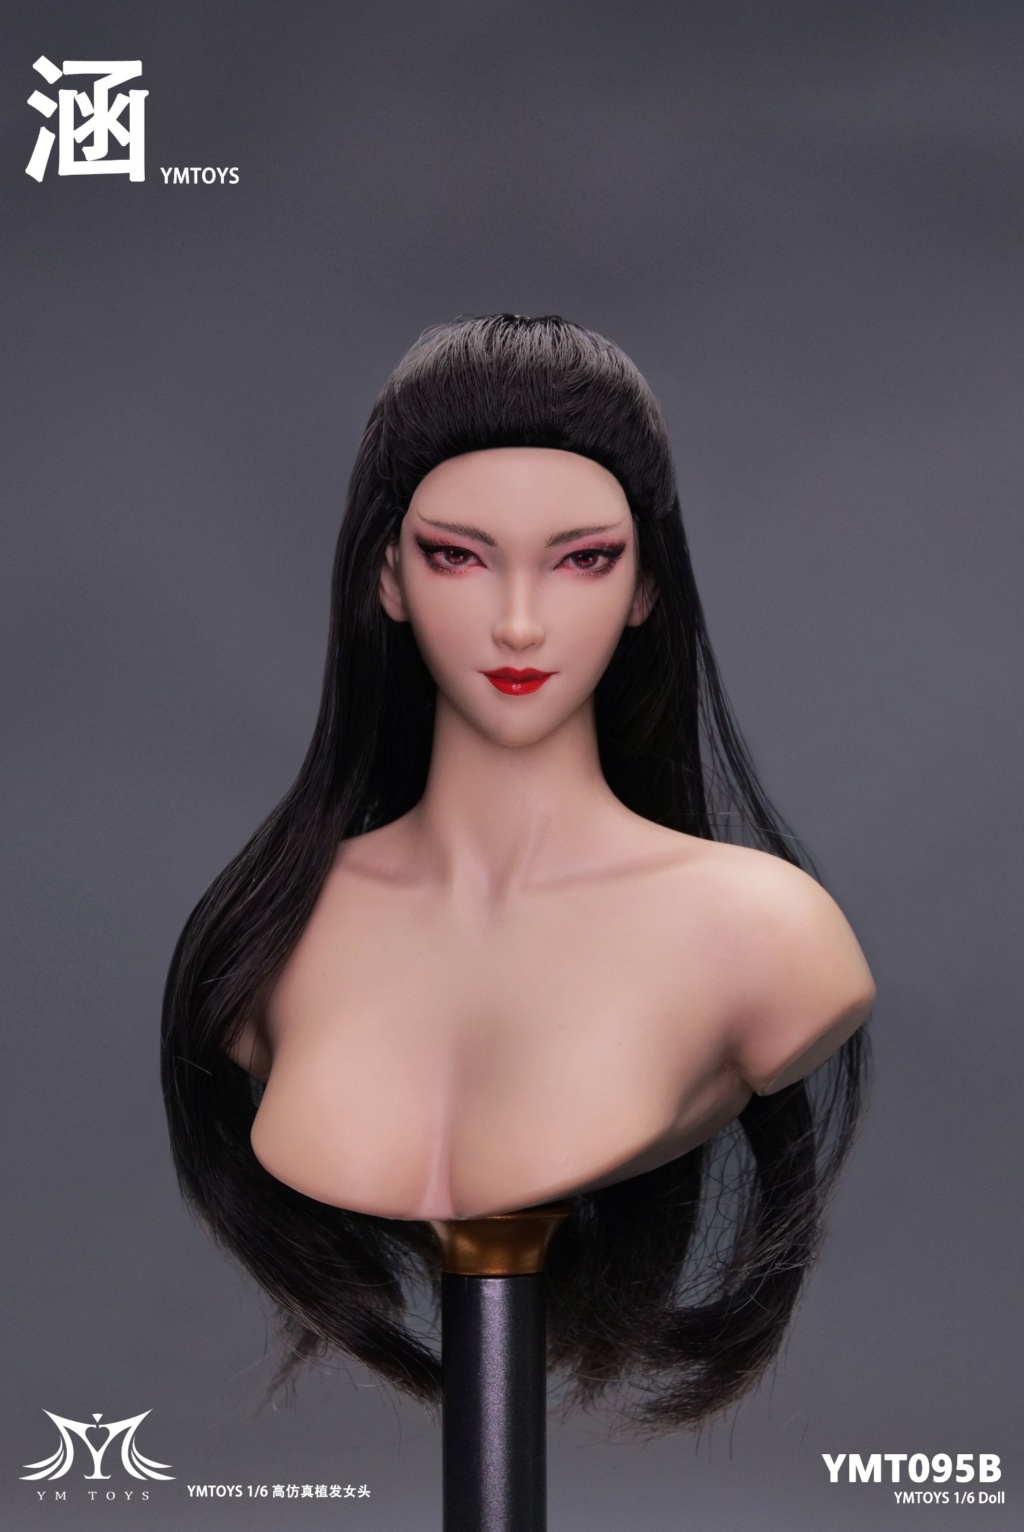 NEW PRODUCT: YMToys: 1/6 hair transplant female head carving Han (YMT095) ​​King (YMT096) 14293610